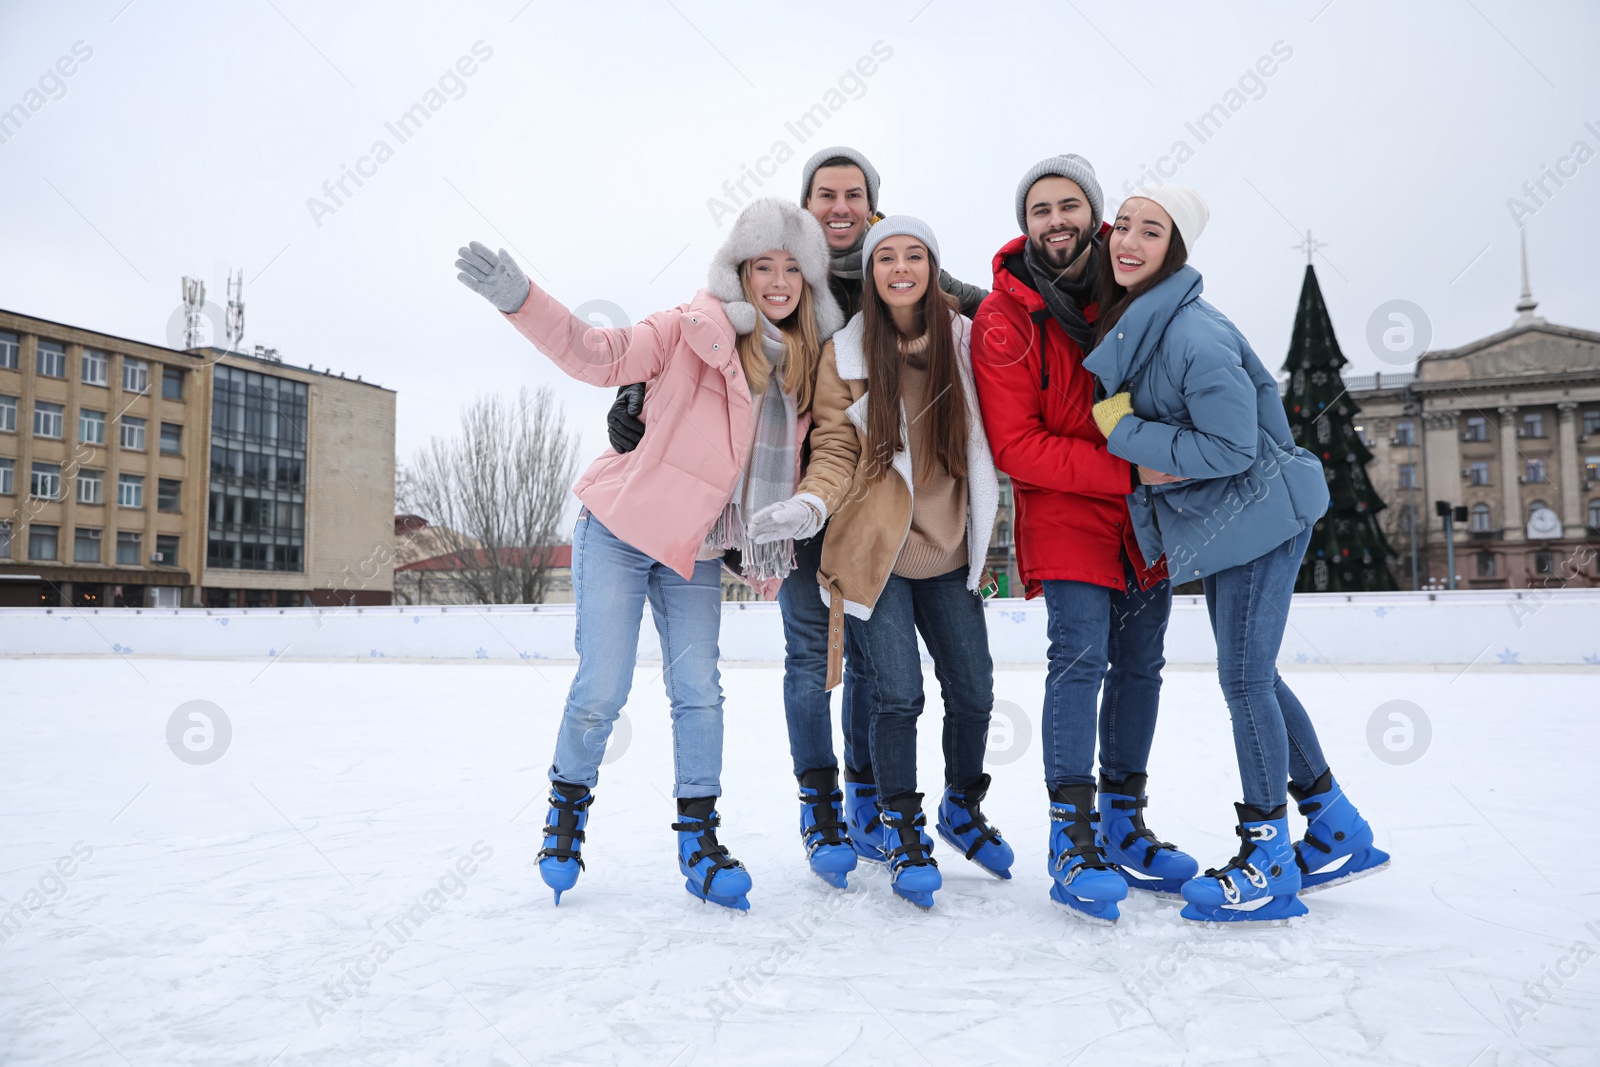 Image of Happy friends at ice skating rink outdoors